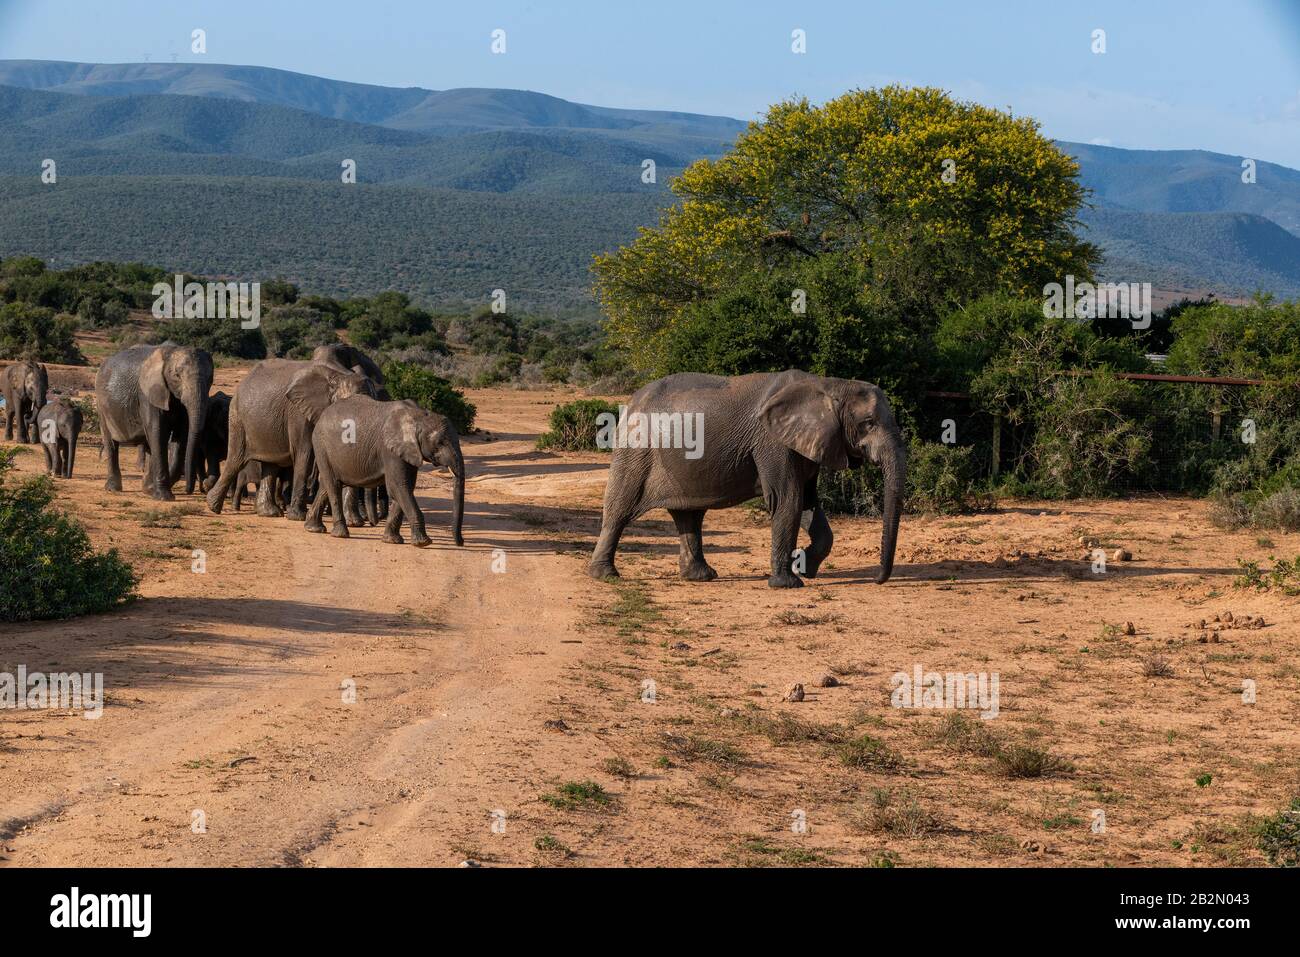 Elephant herd walking through the dry landscape of the Addo Elephant National Park, Eastern Cape, South Africa Stock Photo